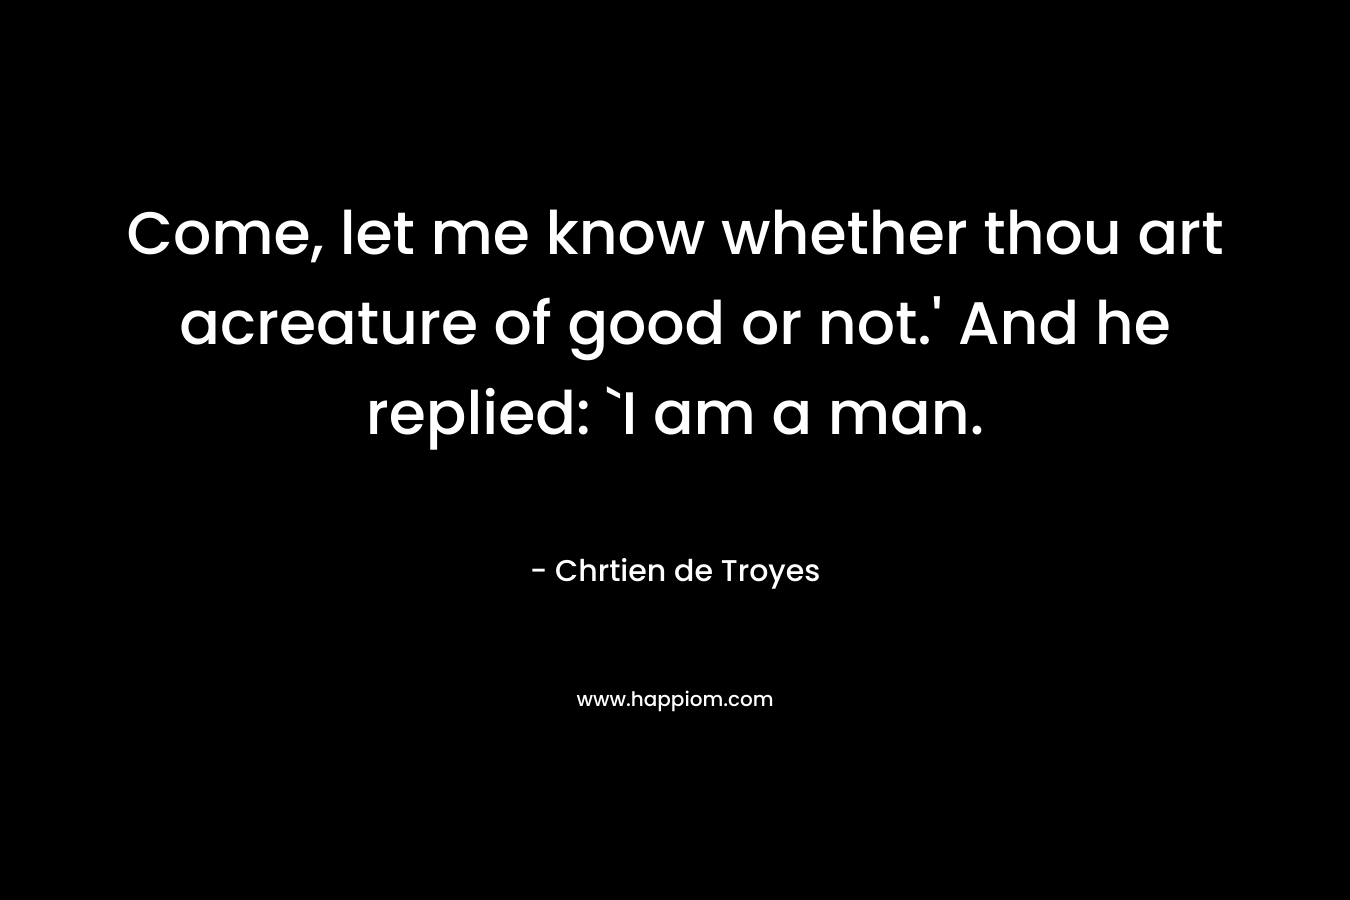 Come, let me know whether thou art acreature of good or not.’ And he replied: `I am a man. – Chrtien de Troyes